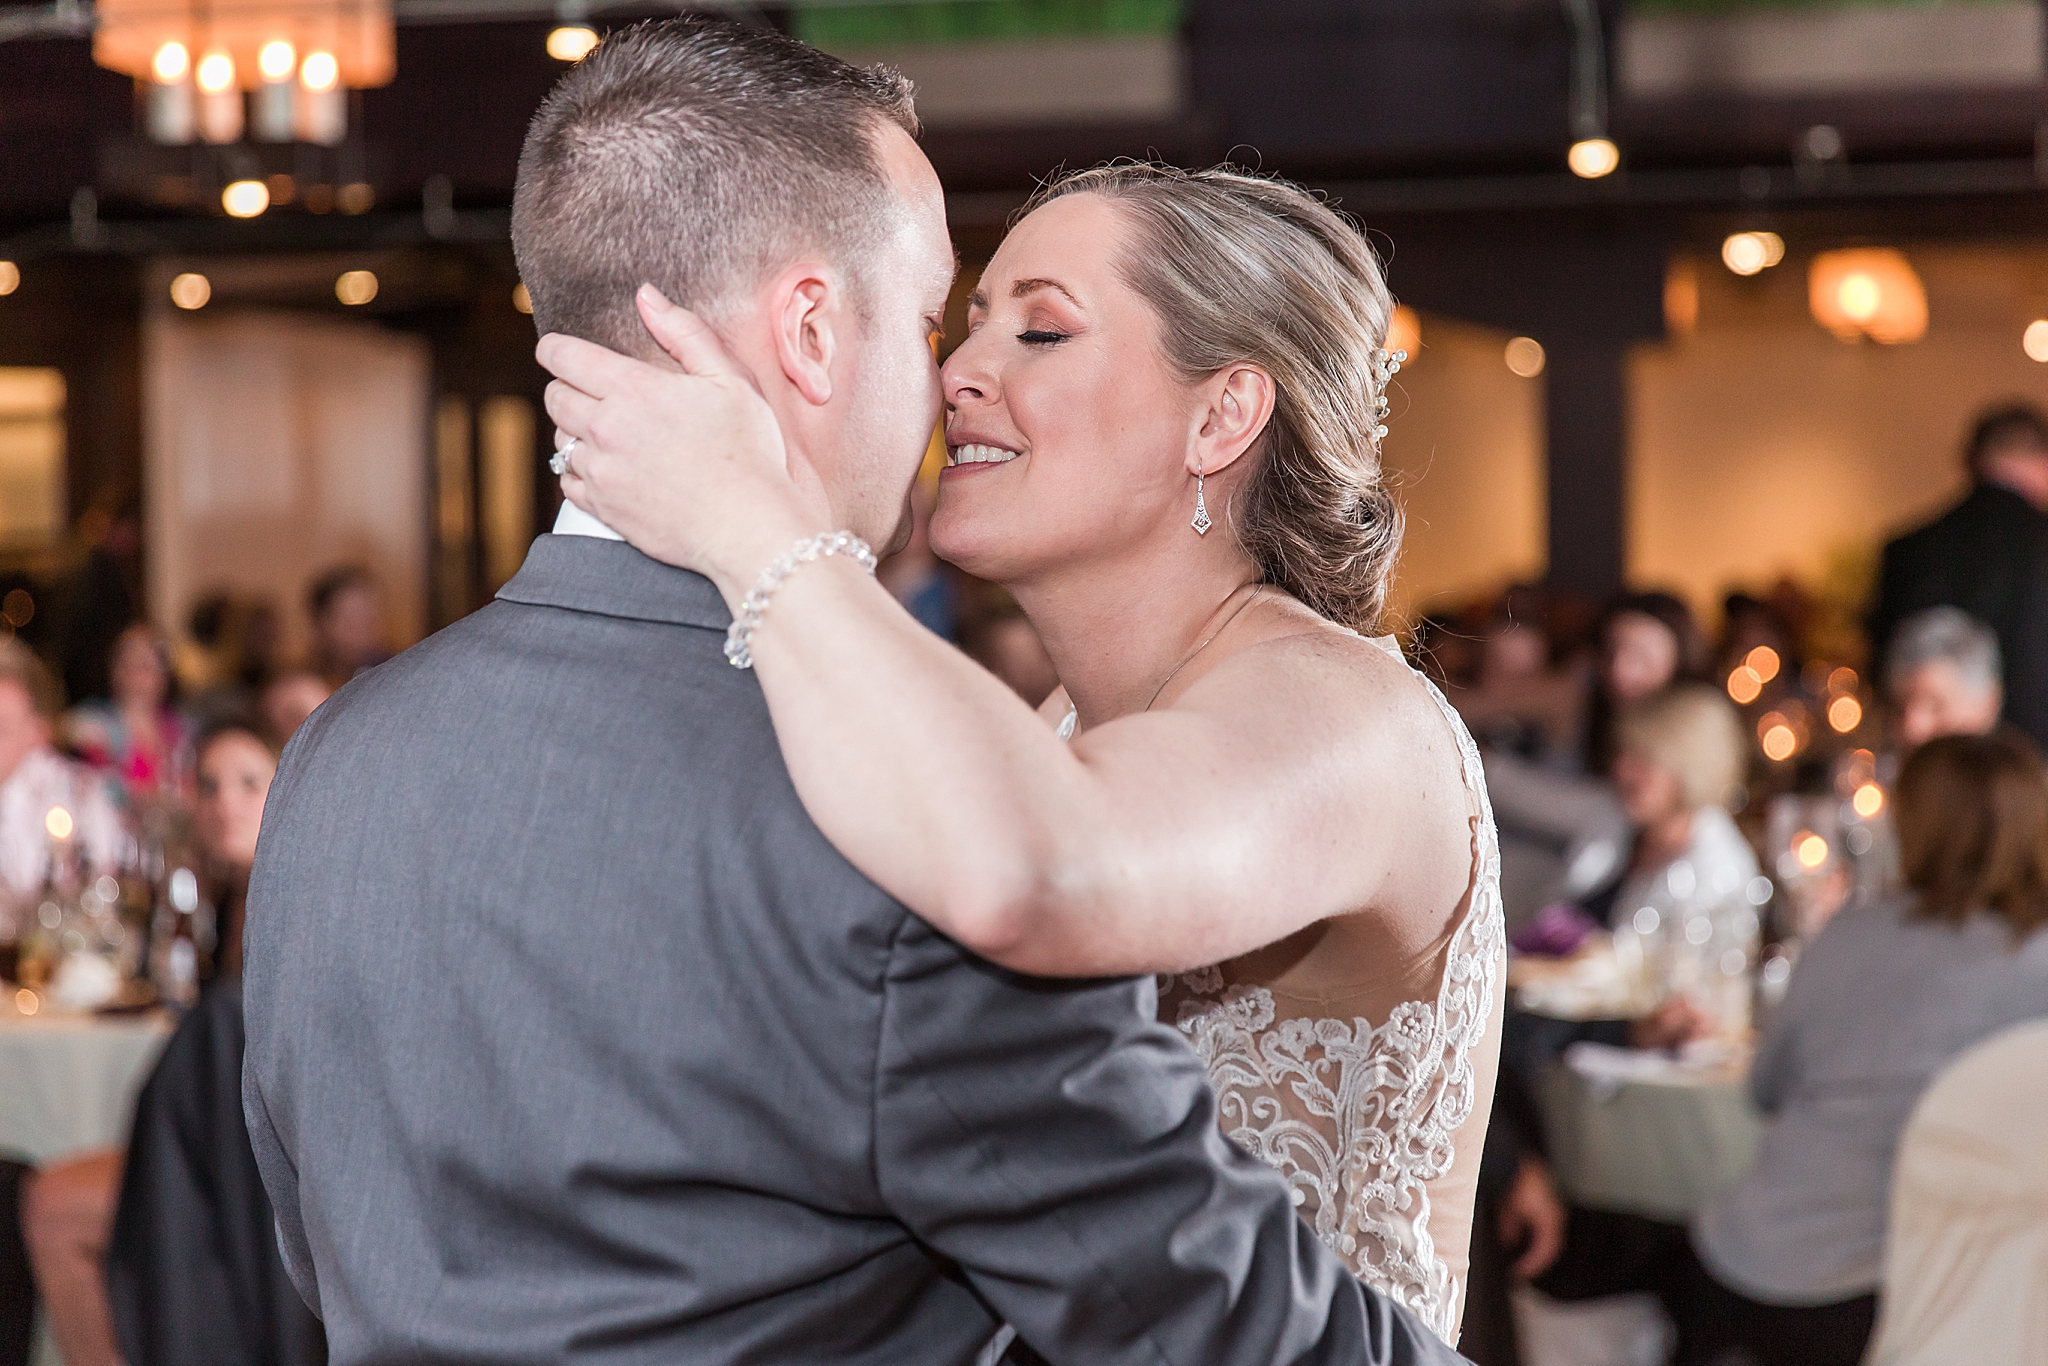 modern-romantic-wedding-photography-at-webers-in-ann-arbor-michigan-by-courtney-carolyn-photography_0079.jpg